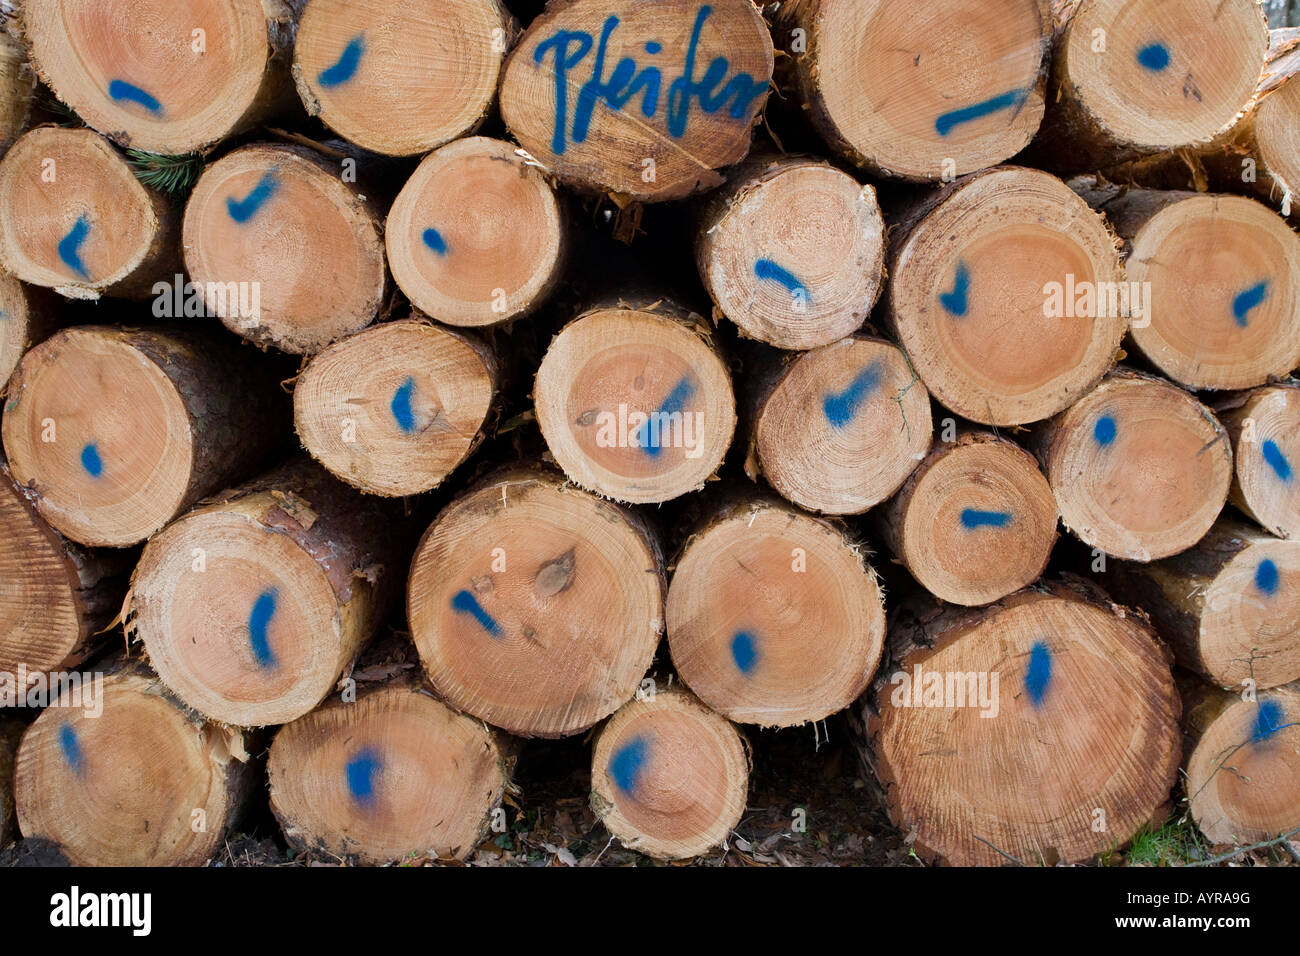 Pile of logs, trees cut down after a storm, Hesse, Germany Stock Photo